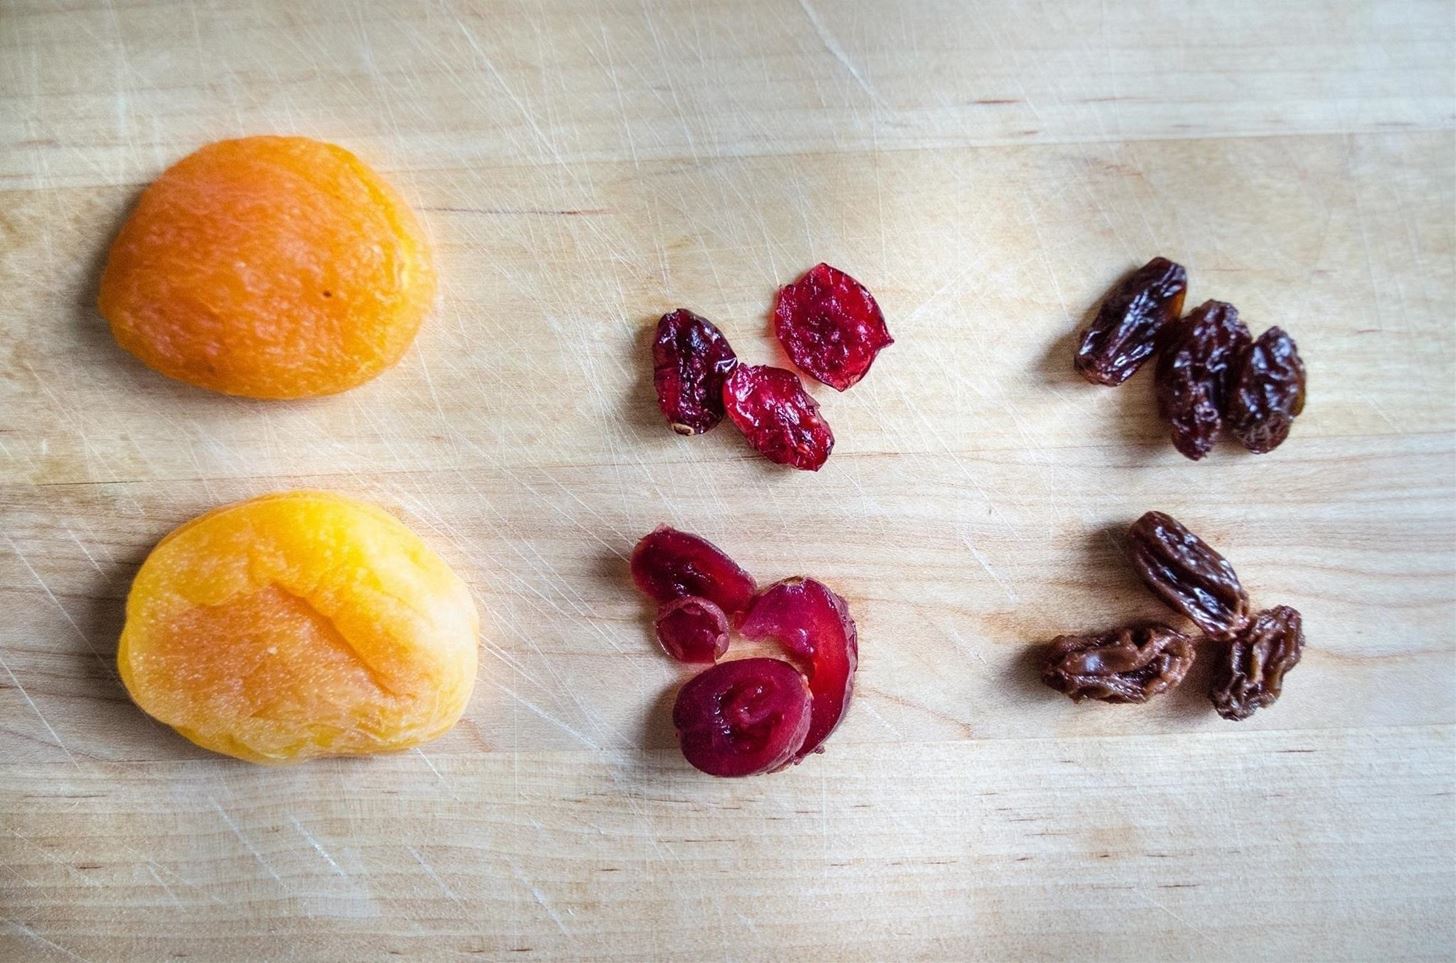 Rehydrate Rock-Hard Dried Fruit with This Clever Hack